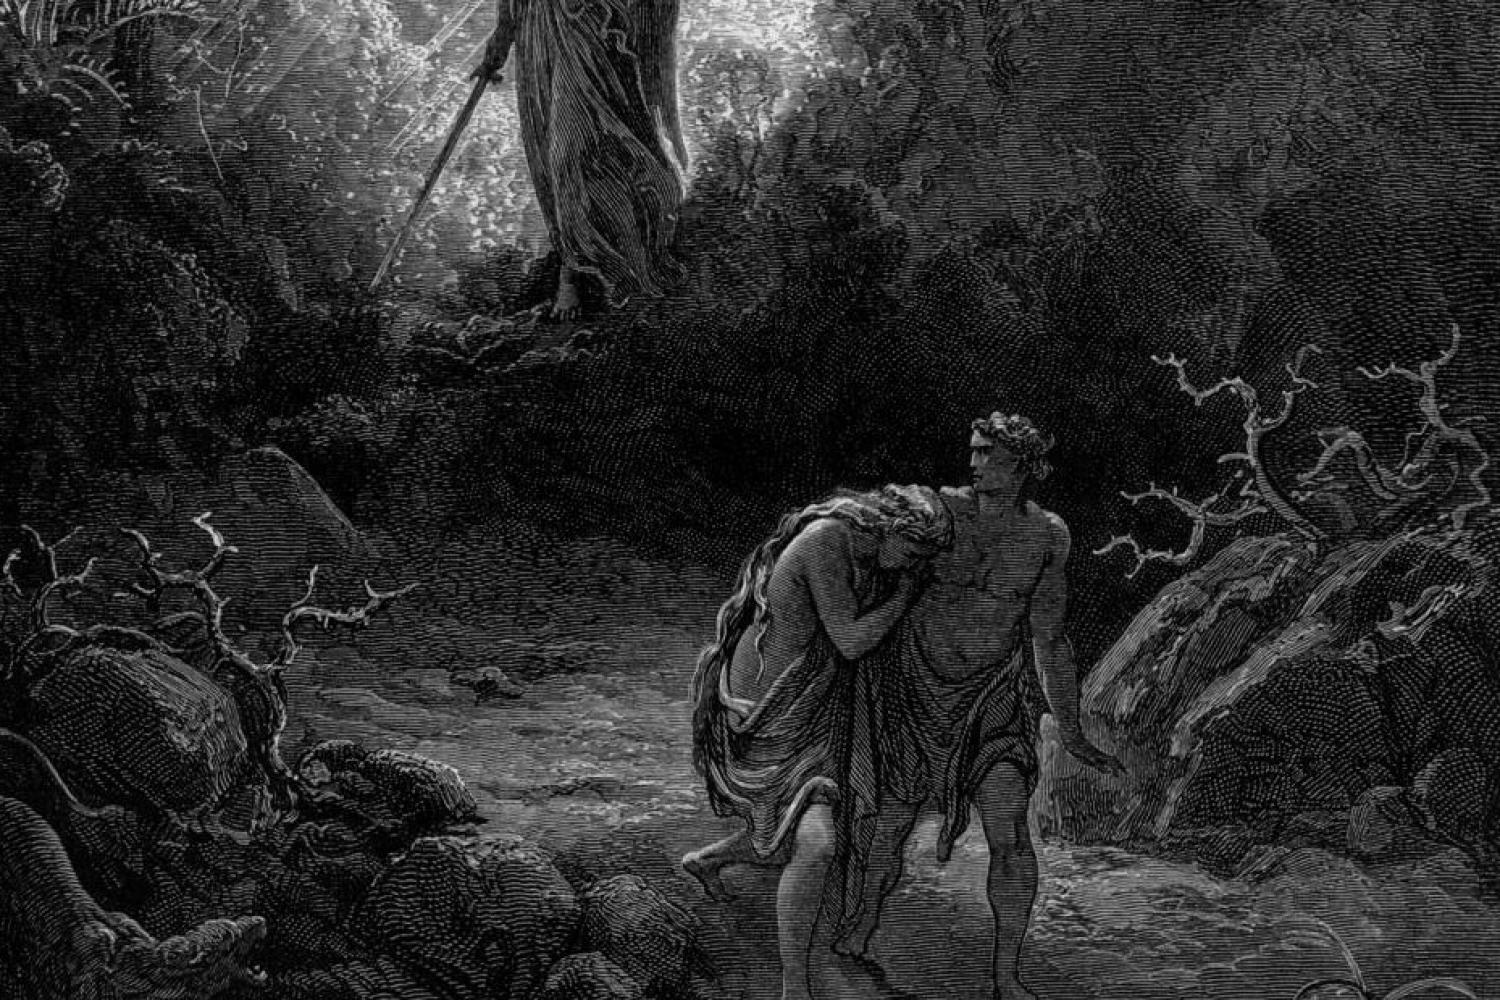 &quot;Adam and Eve Driven out of Eden,&quot; by Gustave Dore